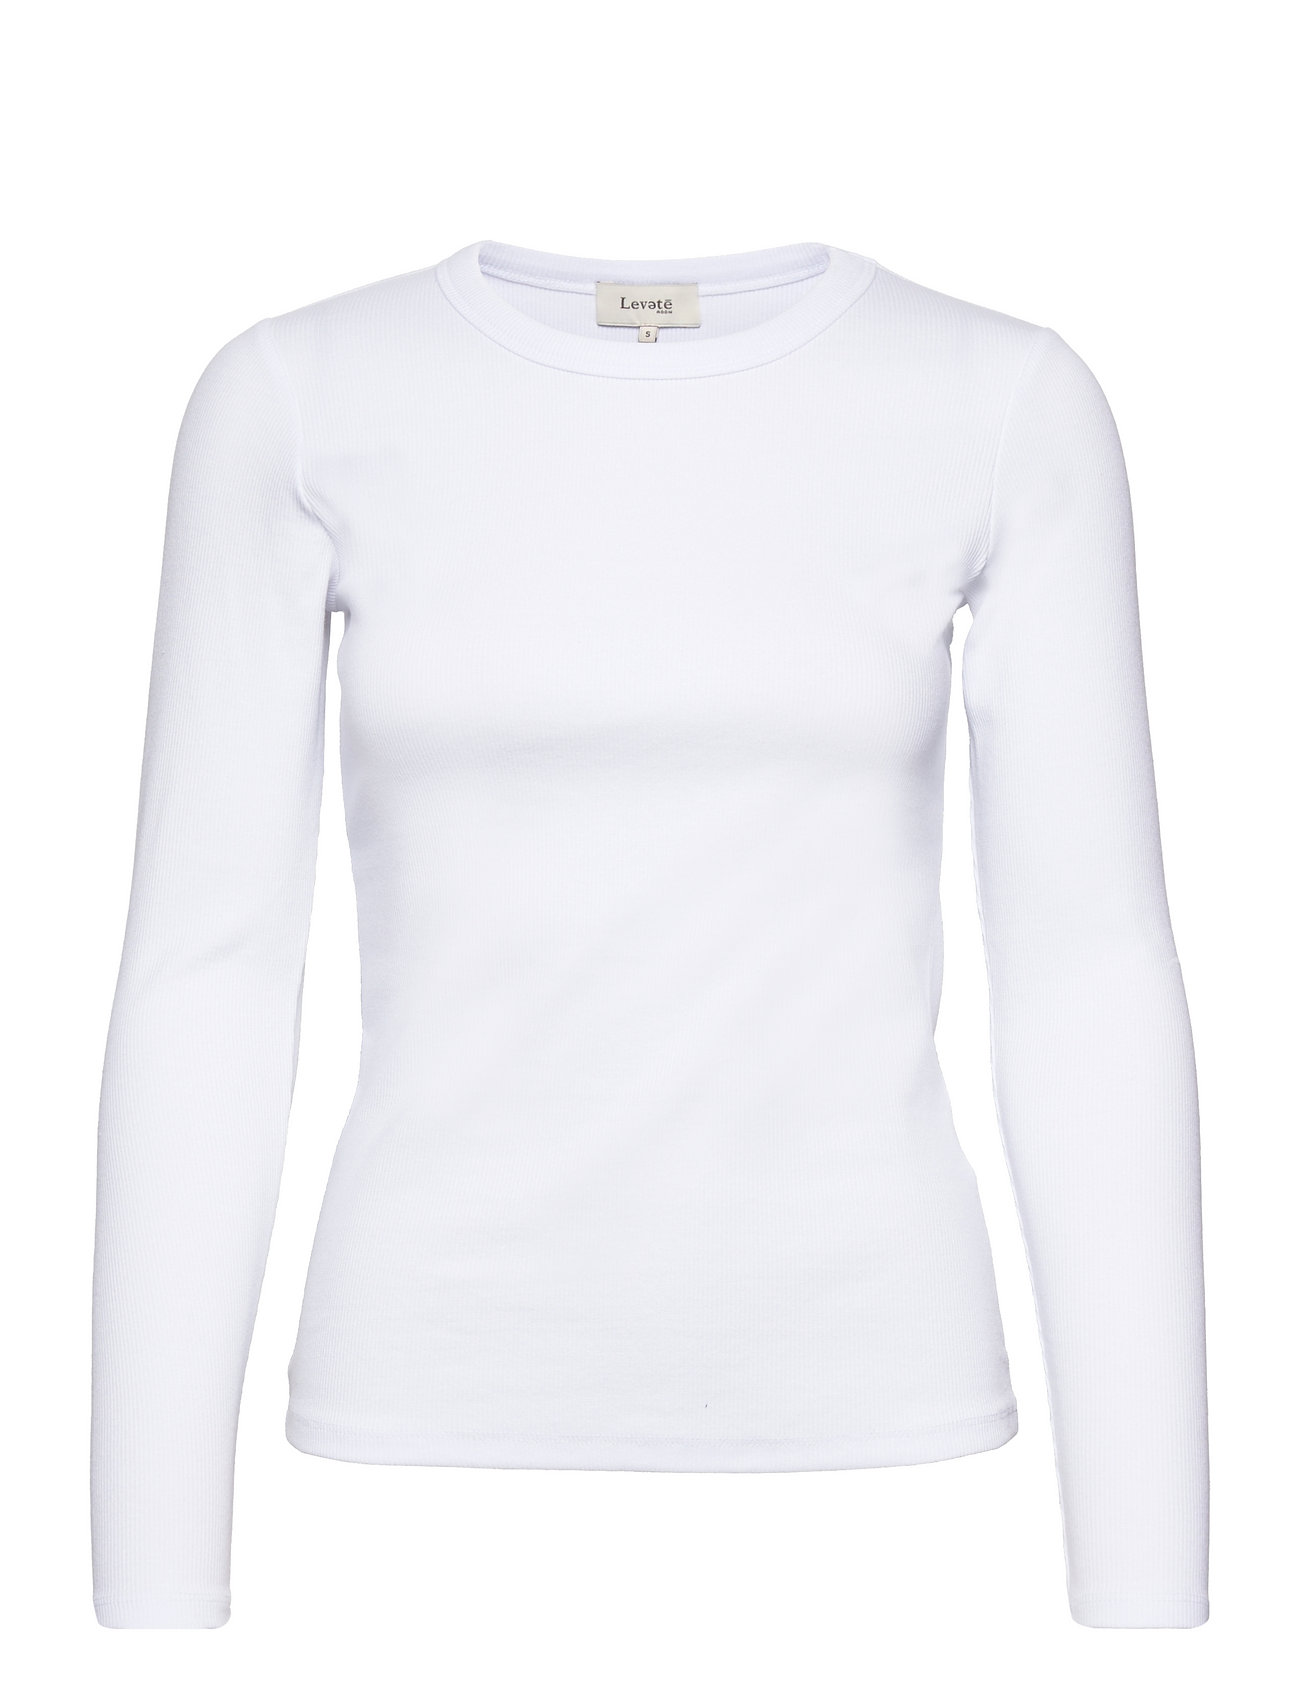 Lr-Numbia Tops T-shirts & Tops Long-sleeved White Levete Room